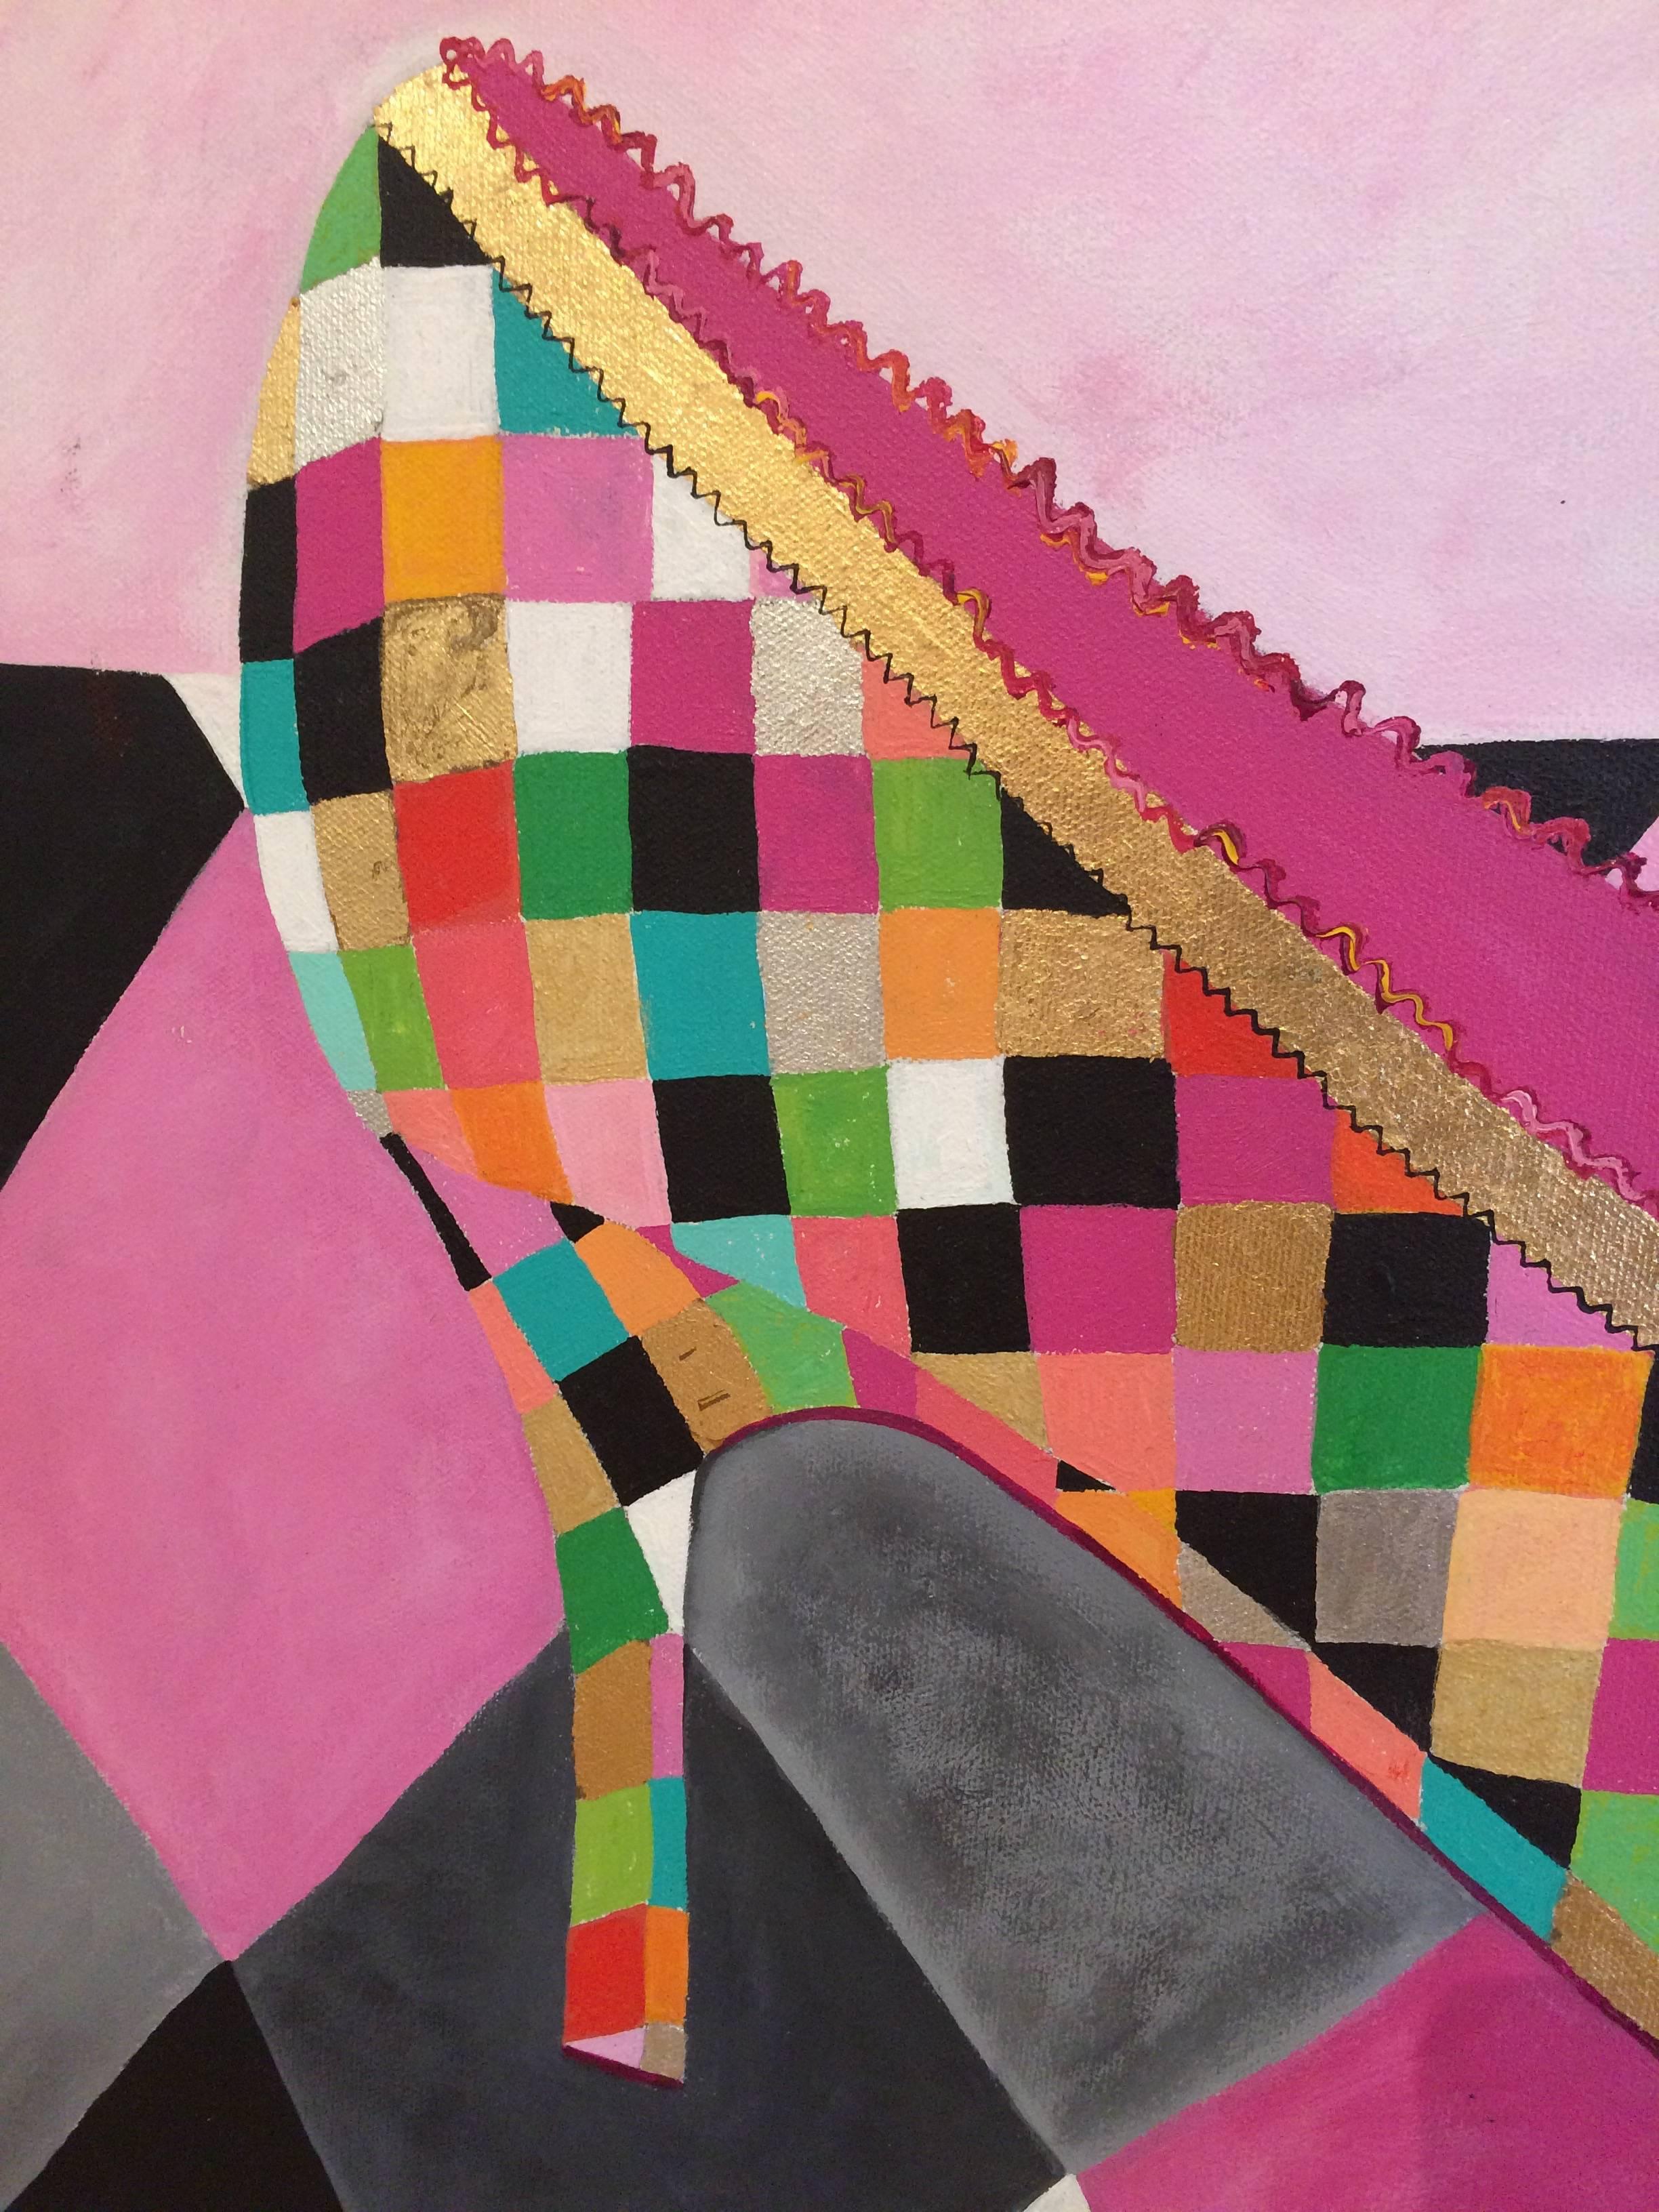 A bold fun contemporary acrylic painting on canvas of a checkerboard high heeled shoe against a 